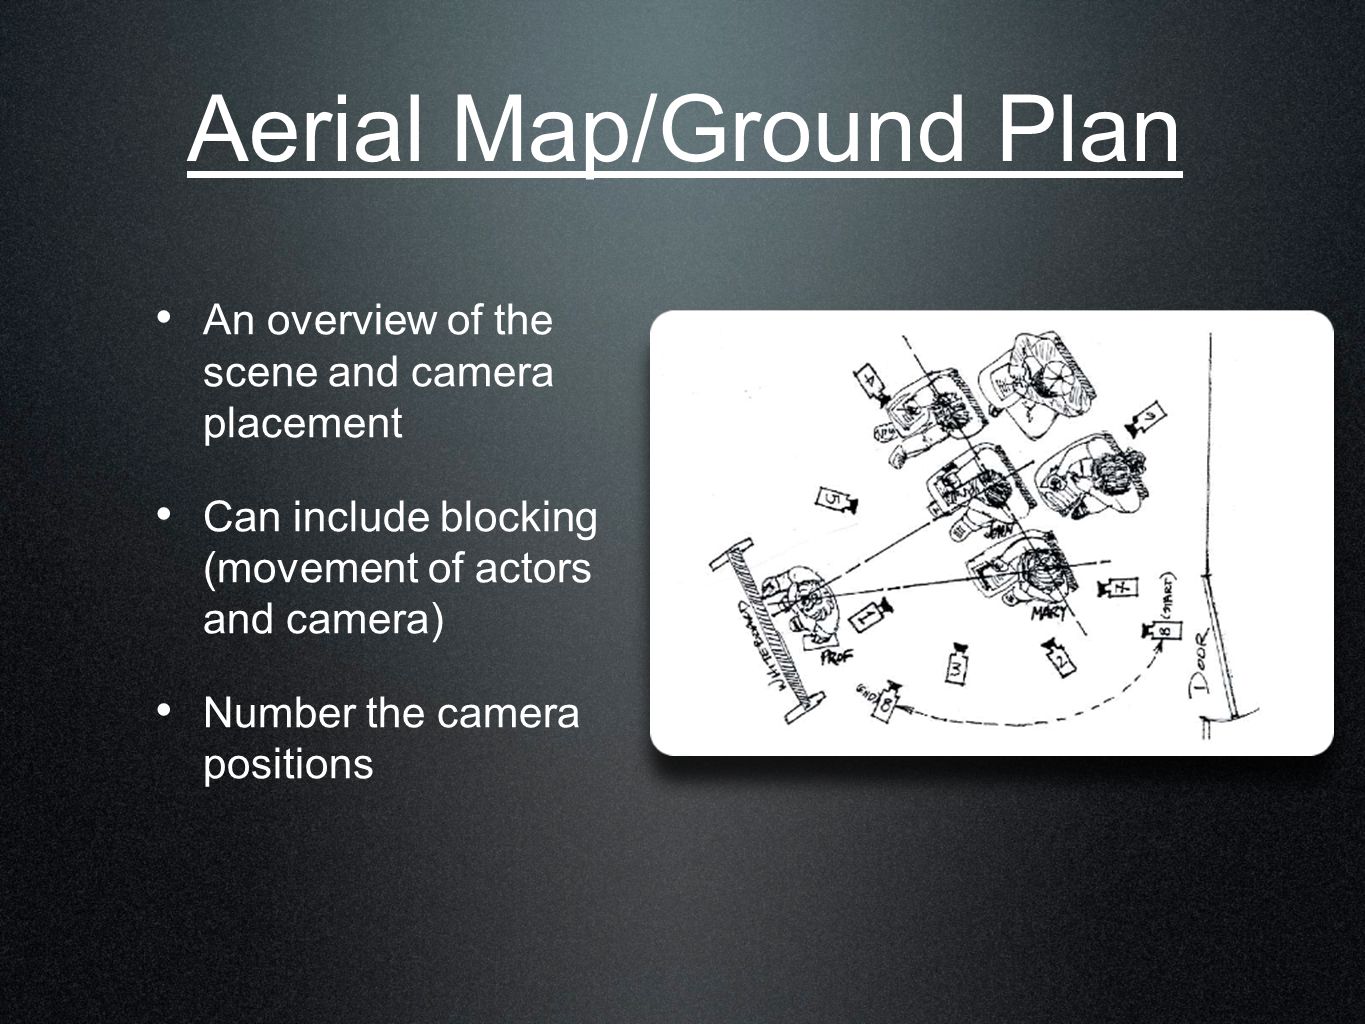 Aerial Map/Ground Plan An overview of the scene and camera placement Can include blocking (movement of actors and camera) Number the camera positions